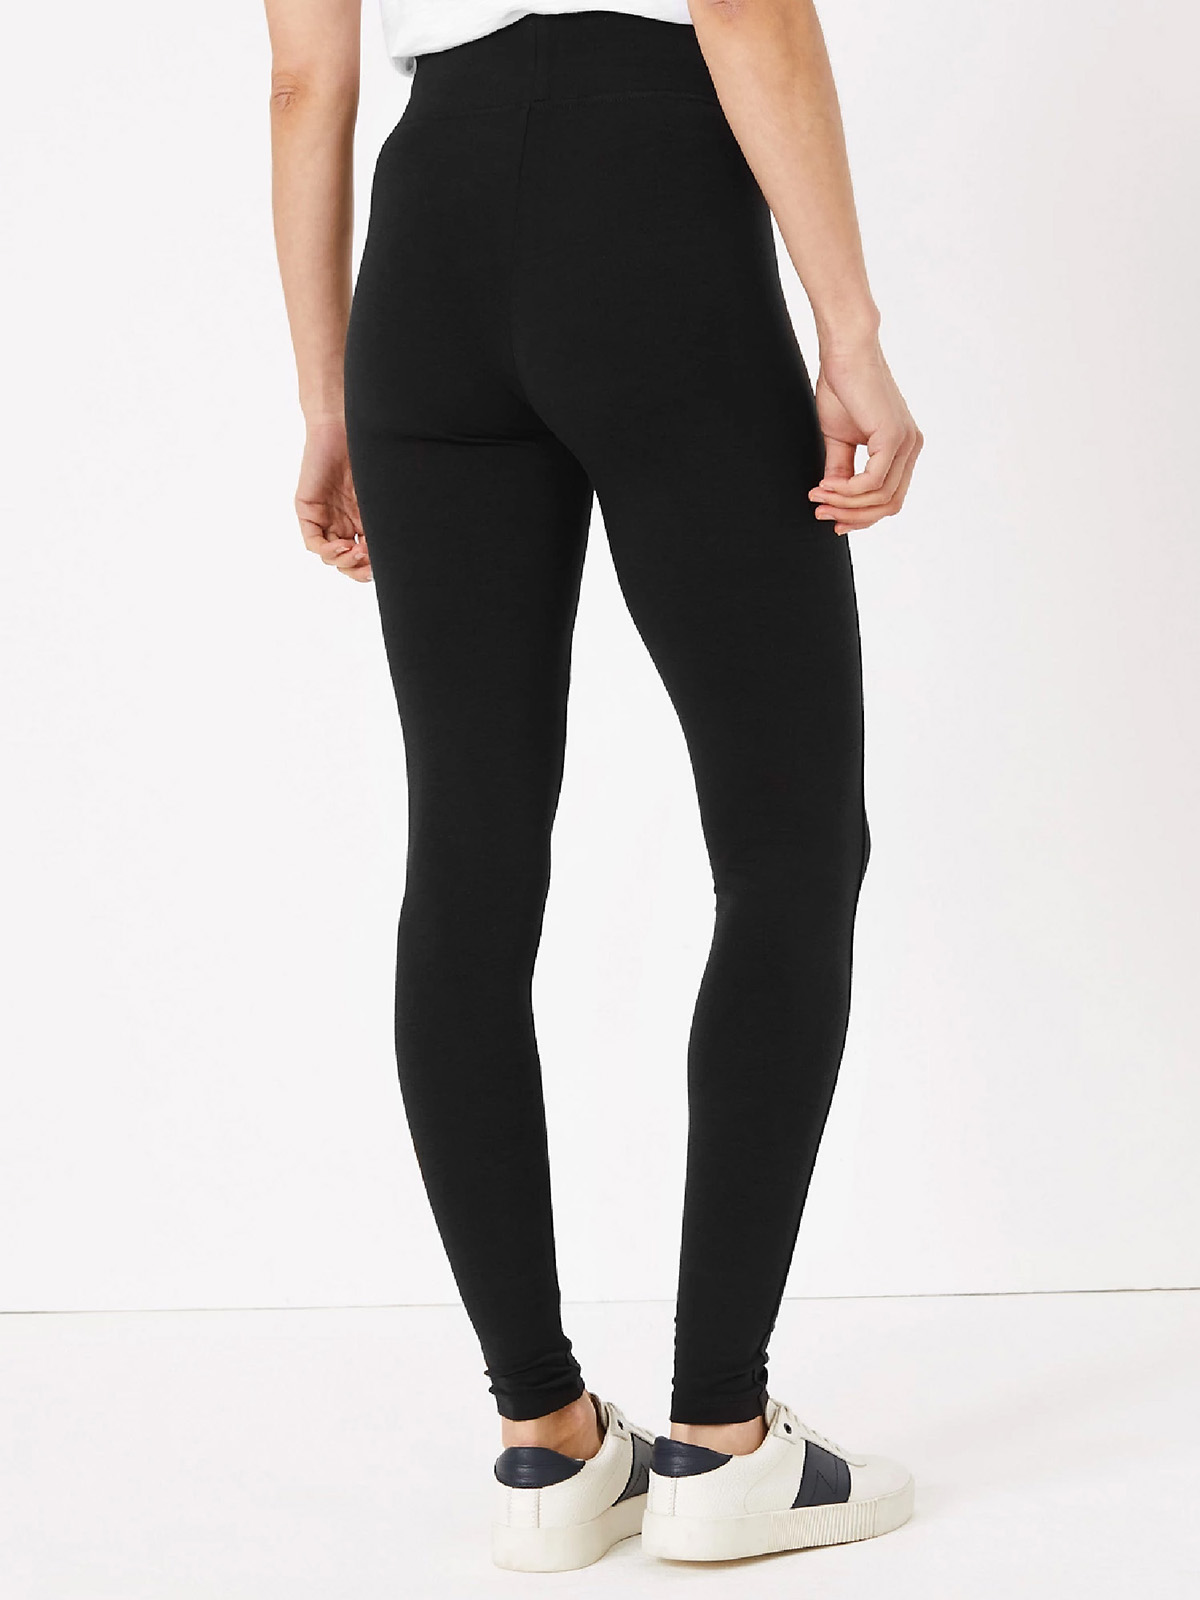 marks-and-spencer-m-5-black-brushed-high-waist-ankle-grazer-leggings-size-8-to-22